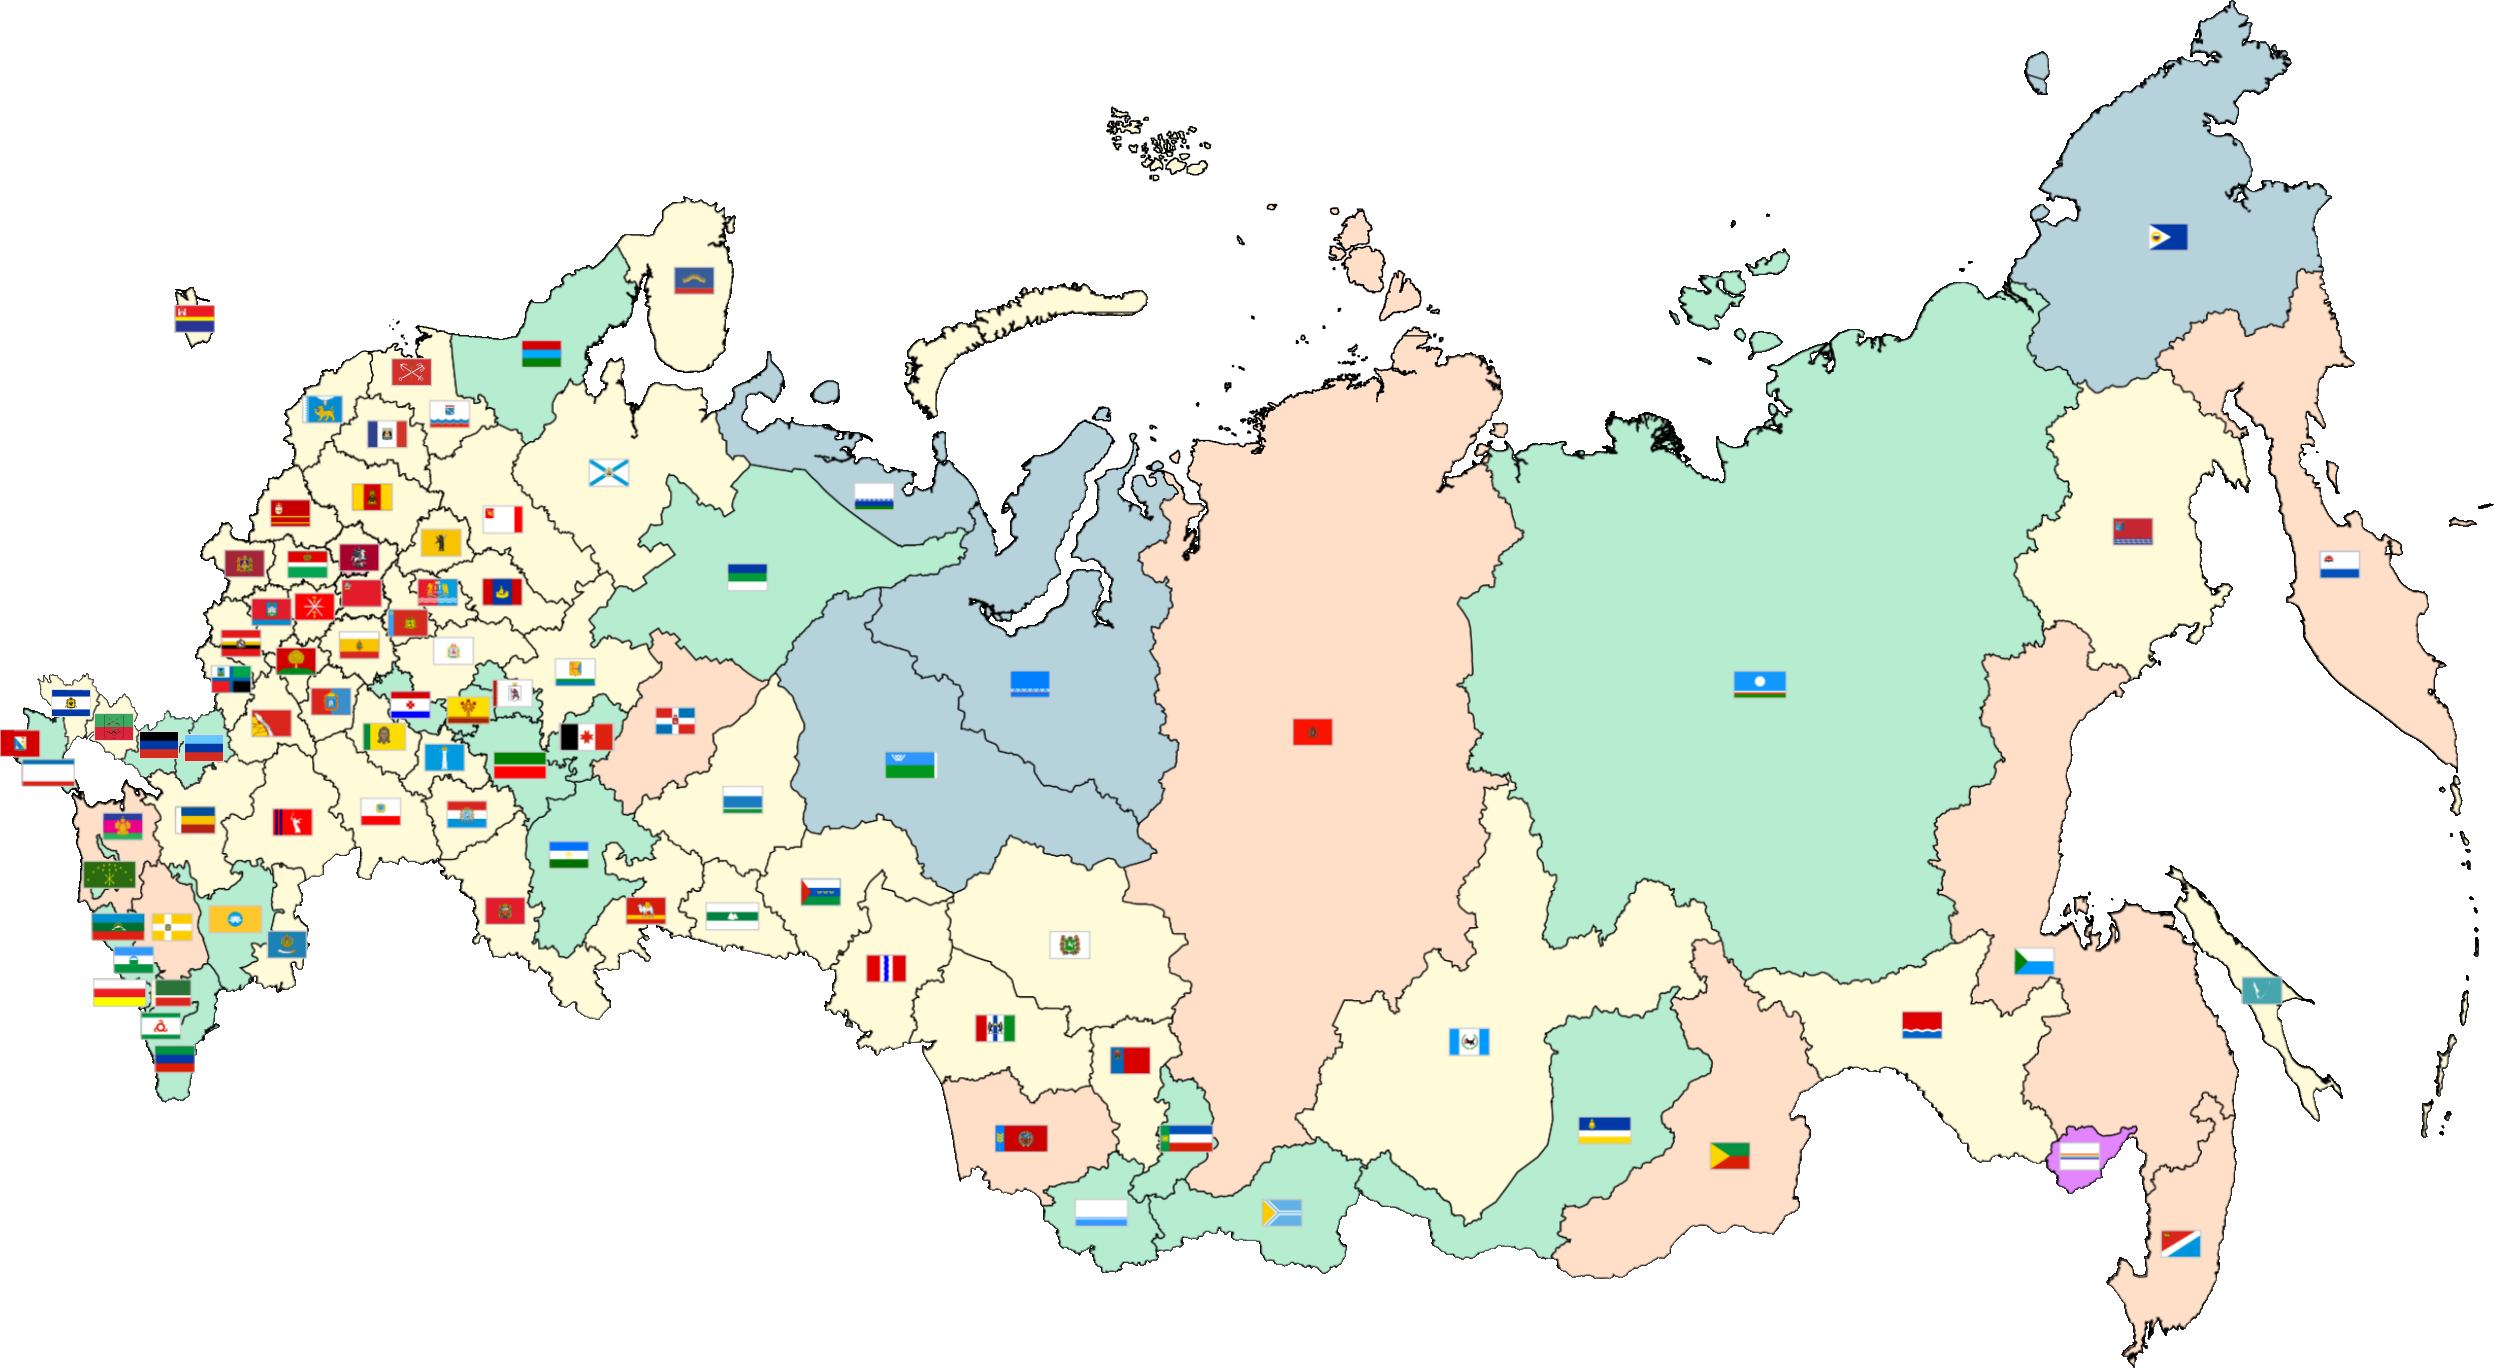 File:Russian Flag with map.png - Wikipedia